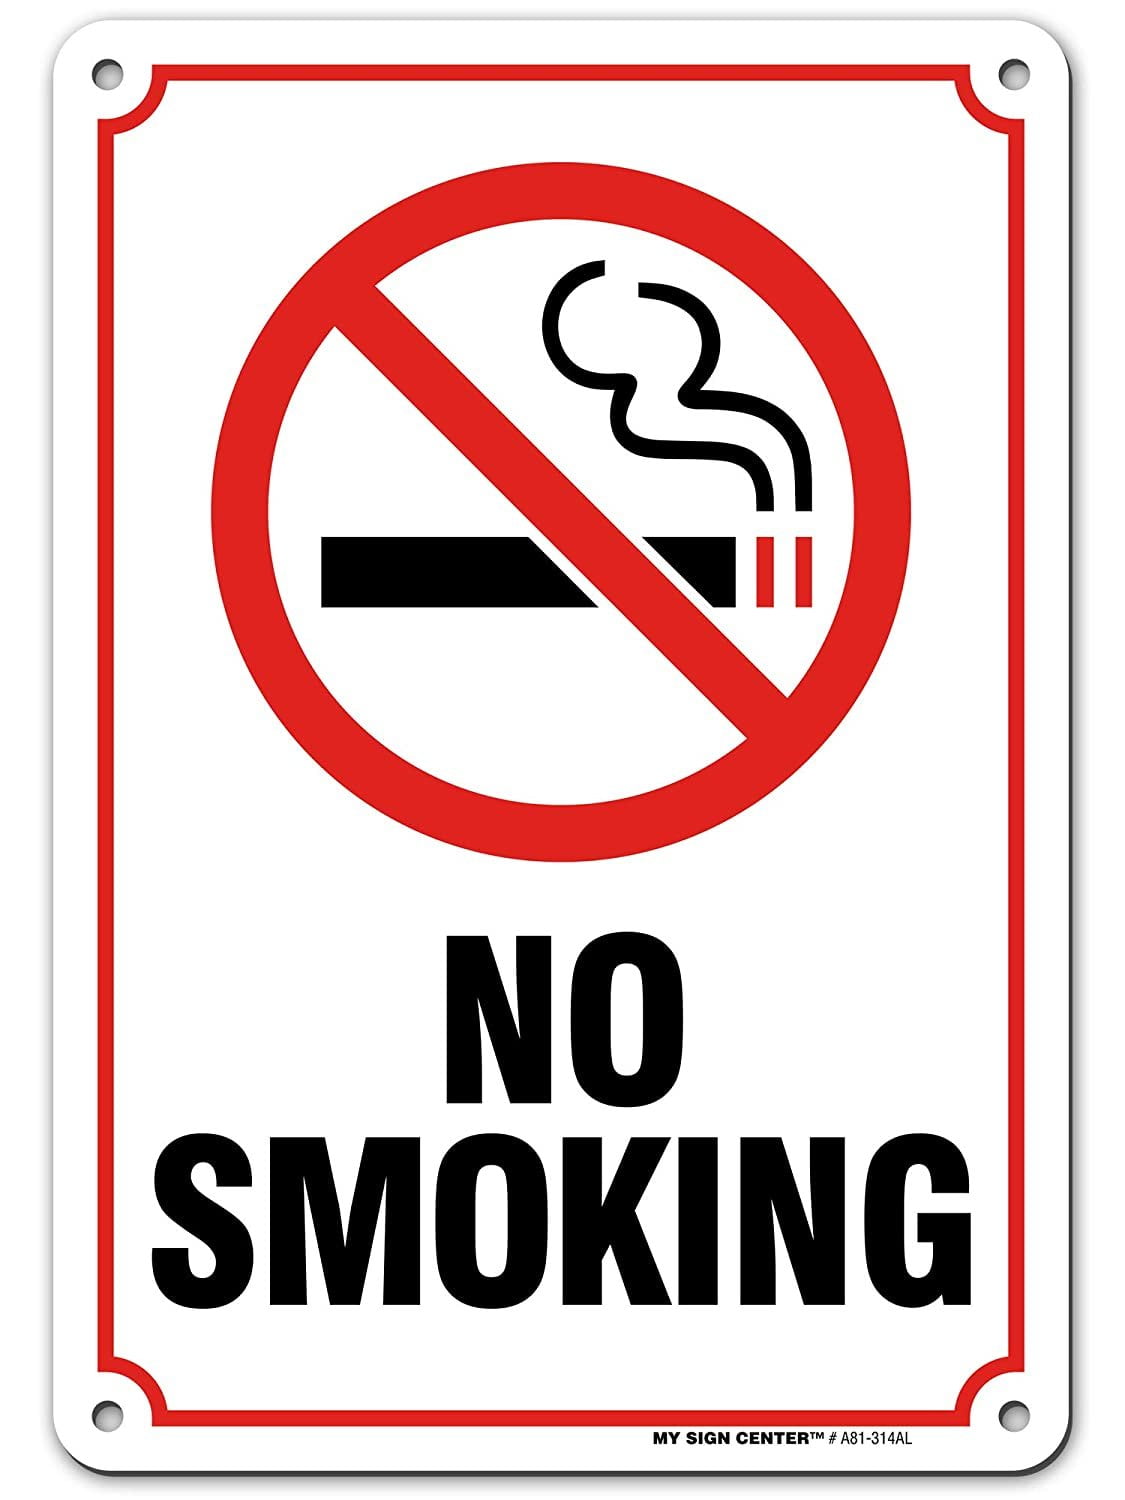 No Smoking In These Premises Sticker No Smoking Sign A4 Inside Glass Stick 